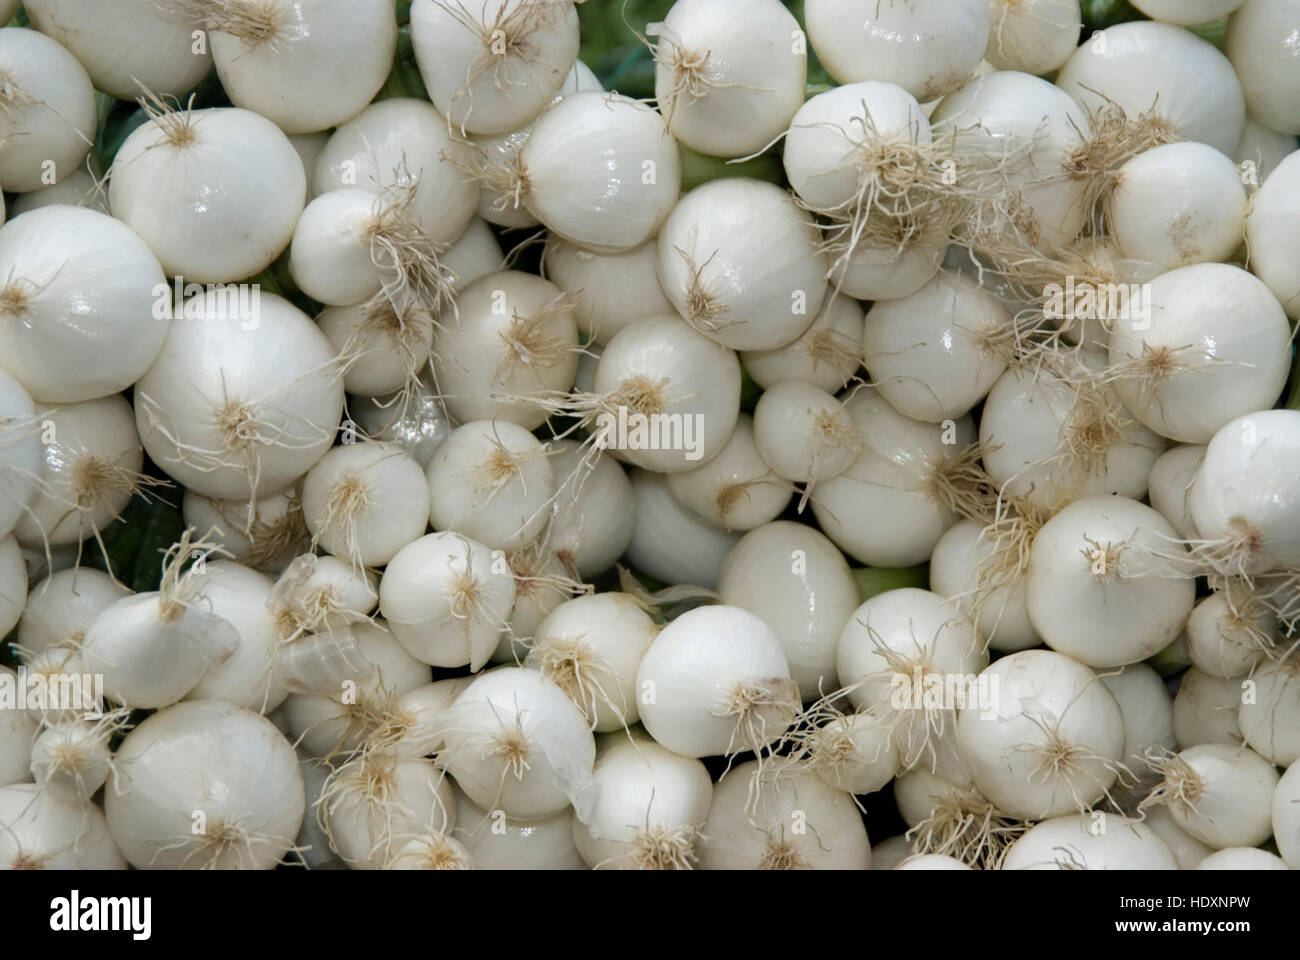 Young onions Stock Photo